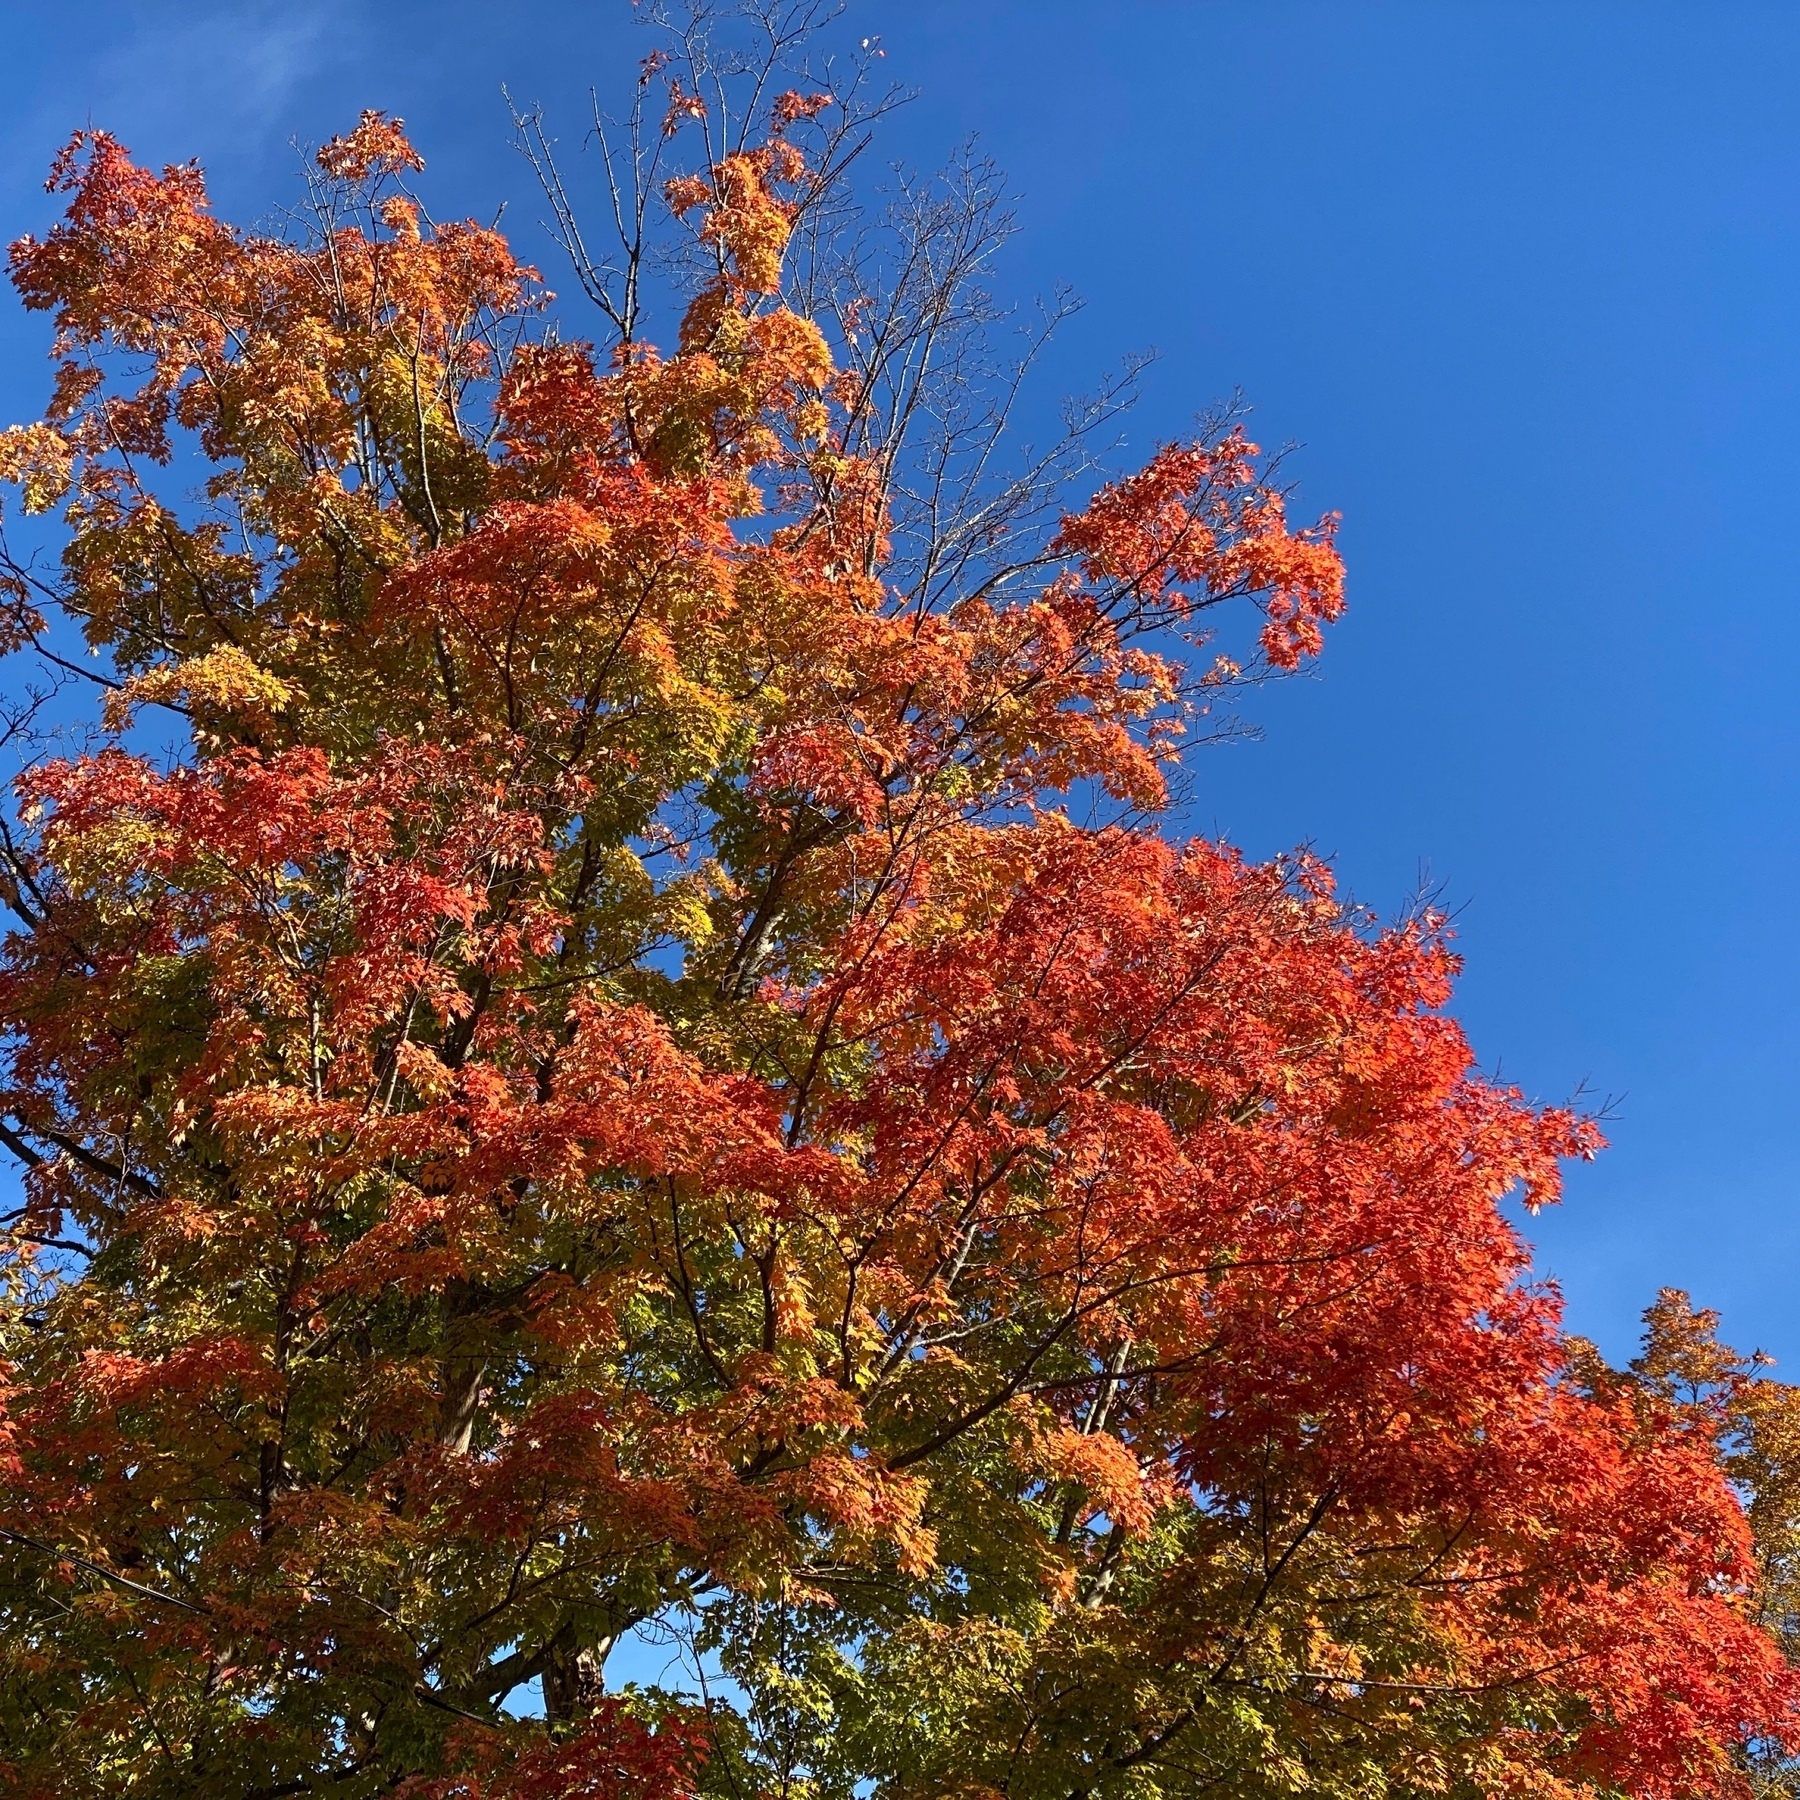 Red leaves on tree against a blue sky.